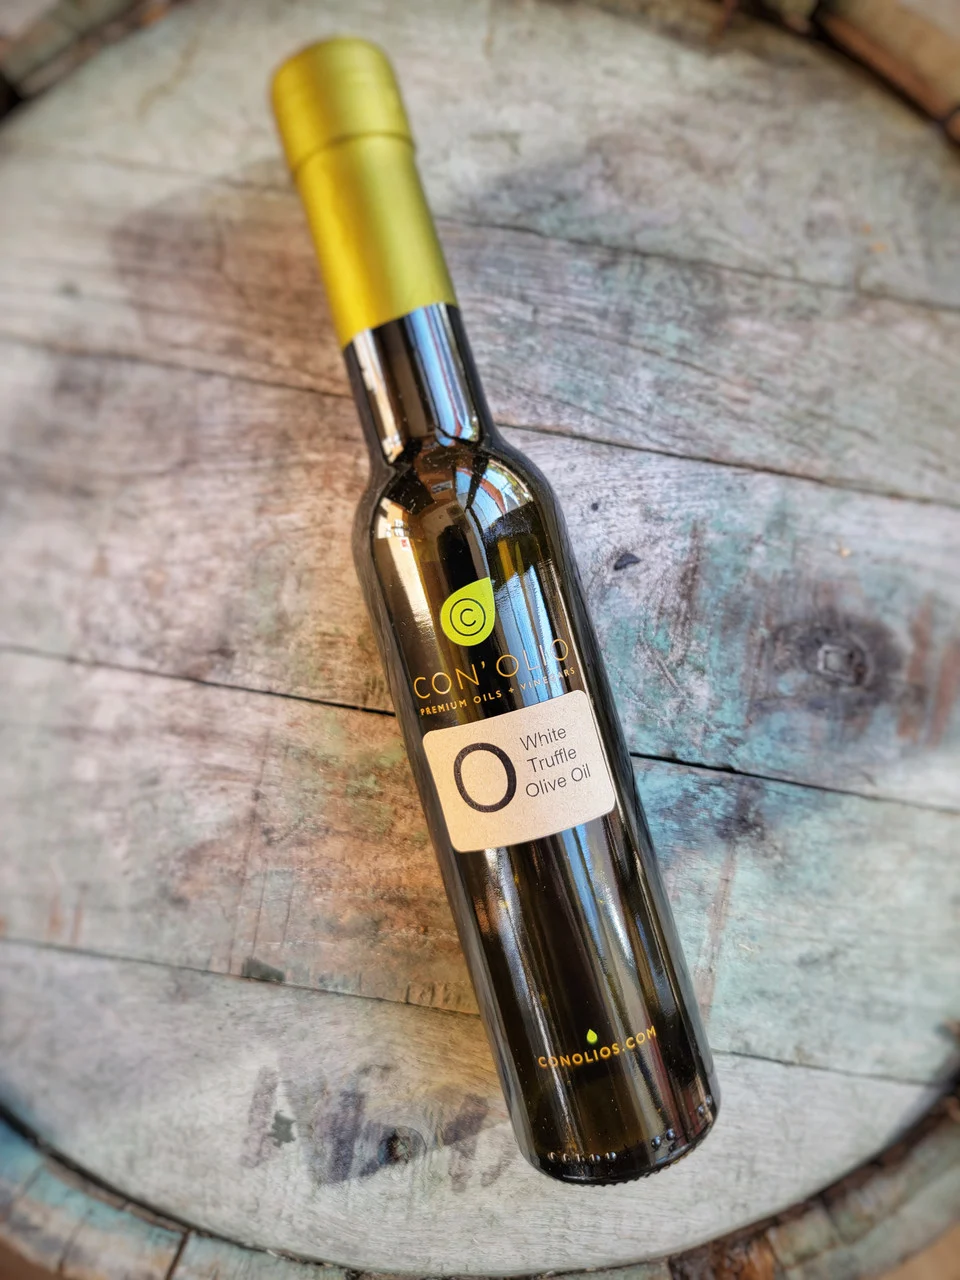 White Truffle Infused Olive Oil from Con’ Olio.